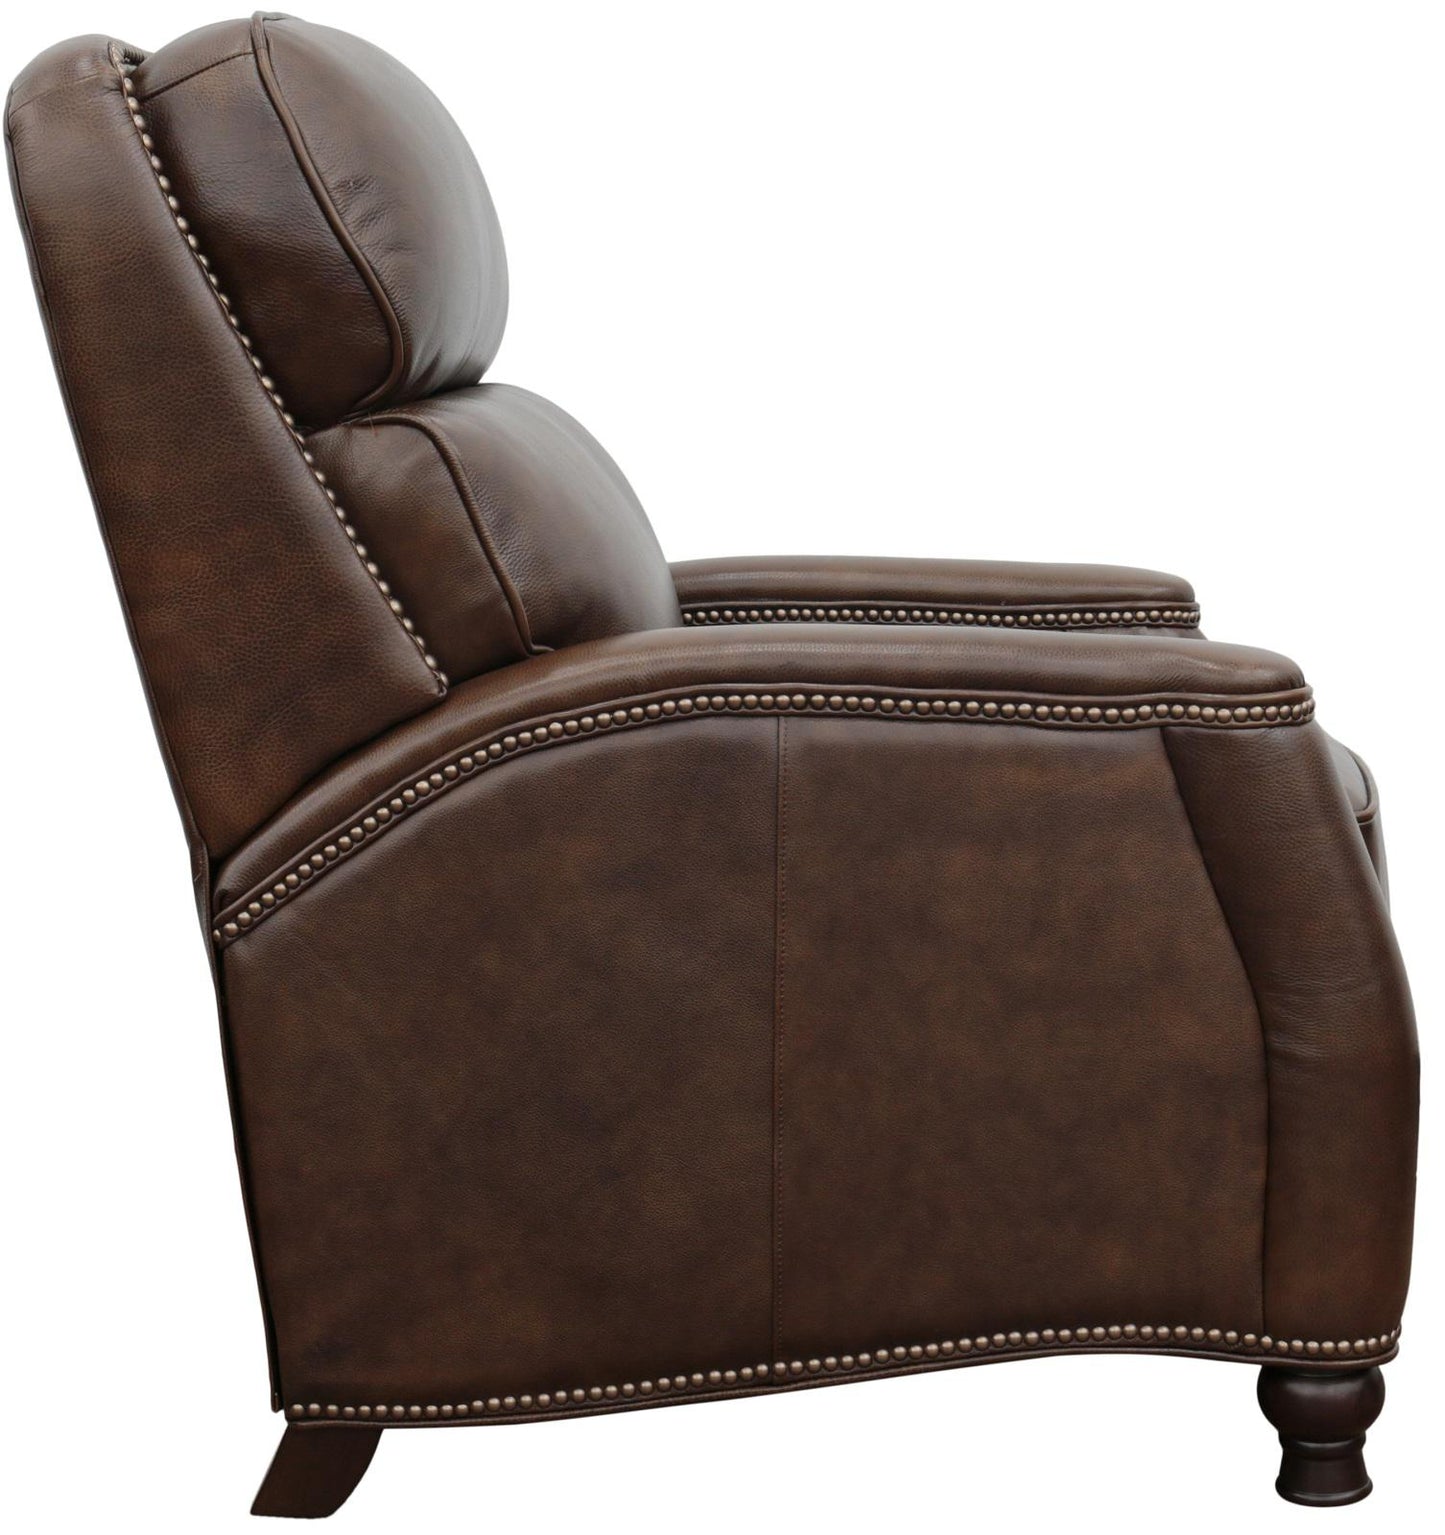 BarcaLounger Townsend Recliner in Wenlock-double chocolate